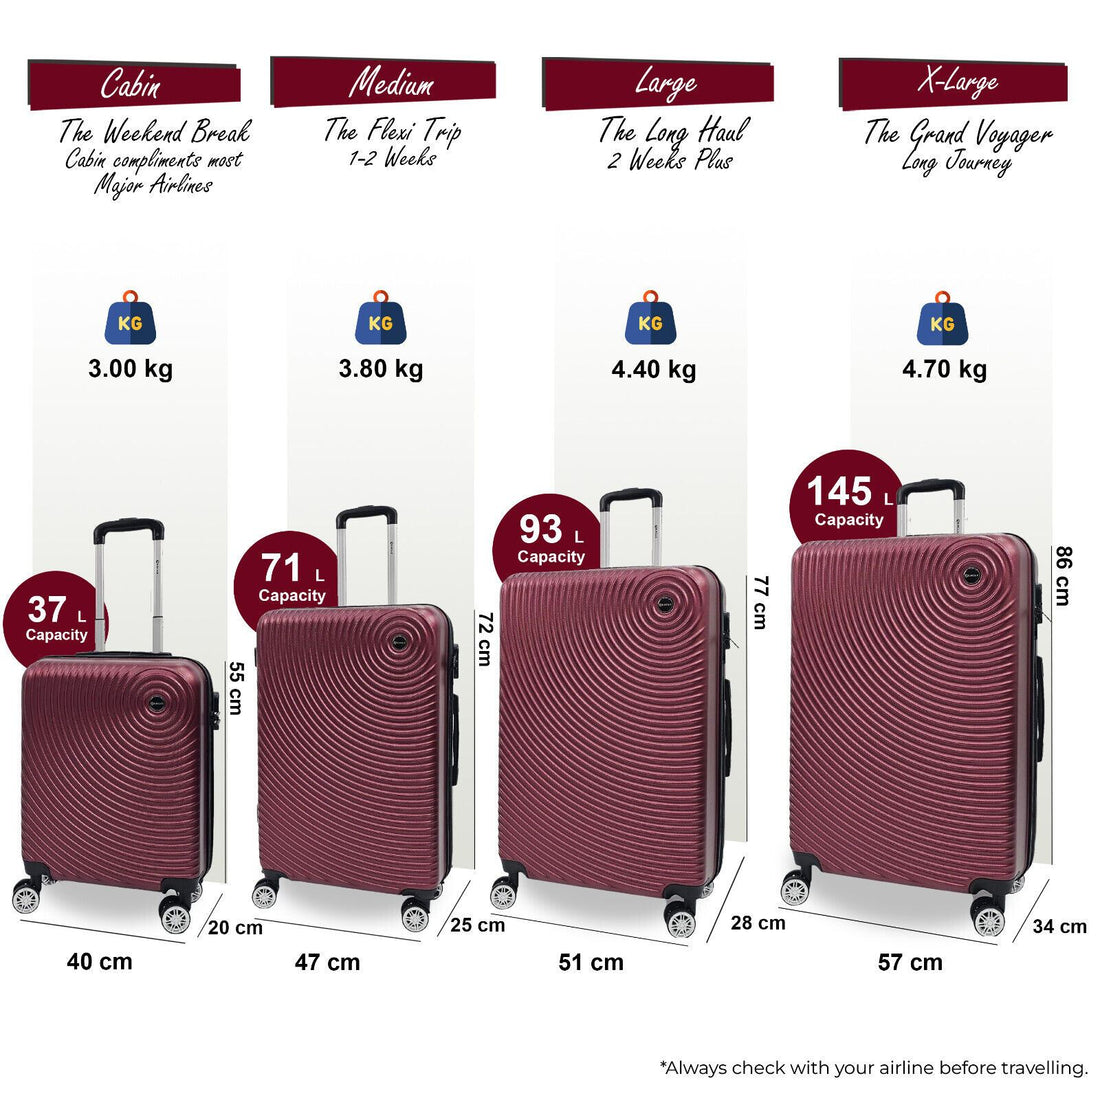 Brookside Set of 4 Hard Shell Suitcase in Burgundy